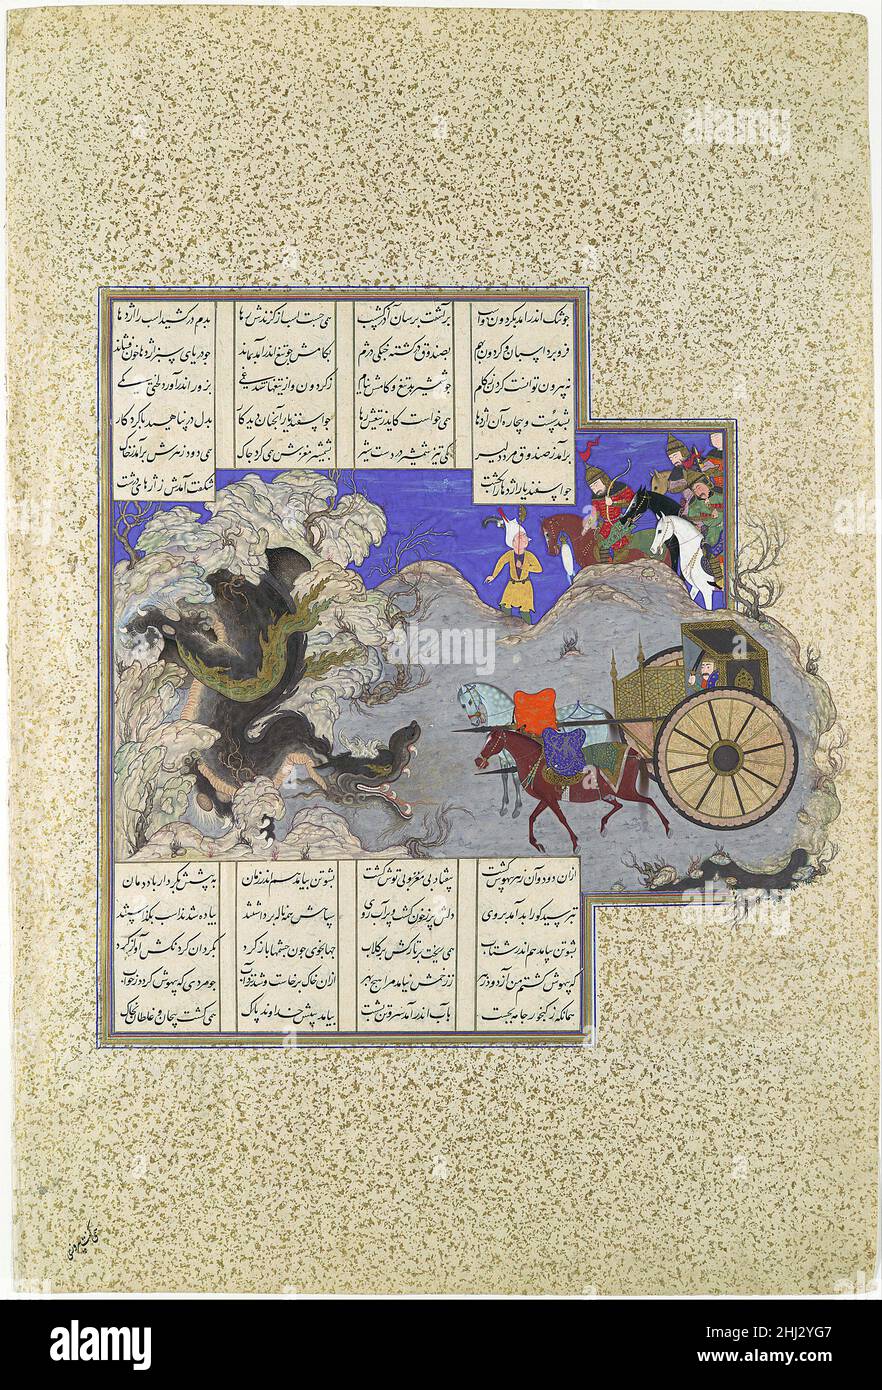 'Isfandiyar's Third Course: He Slays a Dragon', Folio 434v from the Shahnama (Book of Kings) of Shah Tahmasp ca. 1530 Abu'l Qasim Firdausi This dramatic image illustrates the third of seven challenges, or courses, that Prince Isfandiyar underwent en route to freeing his sisters from captivity in Turan. Learning that he would encounter a dragon on his perilous path, Isfandiyar ordered a horse-drawn cart with a box in which he could hide and from which spears projected. Here, the dragon has appeared and is sucking the horses into its maw, soon to be impaled on the spears and slashed by Isfandiya Stock Photo